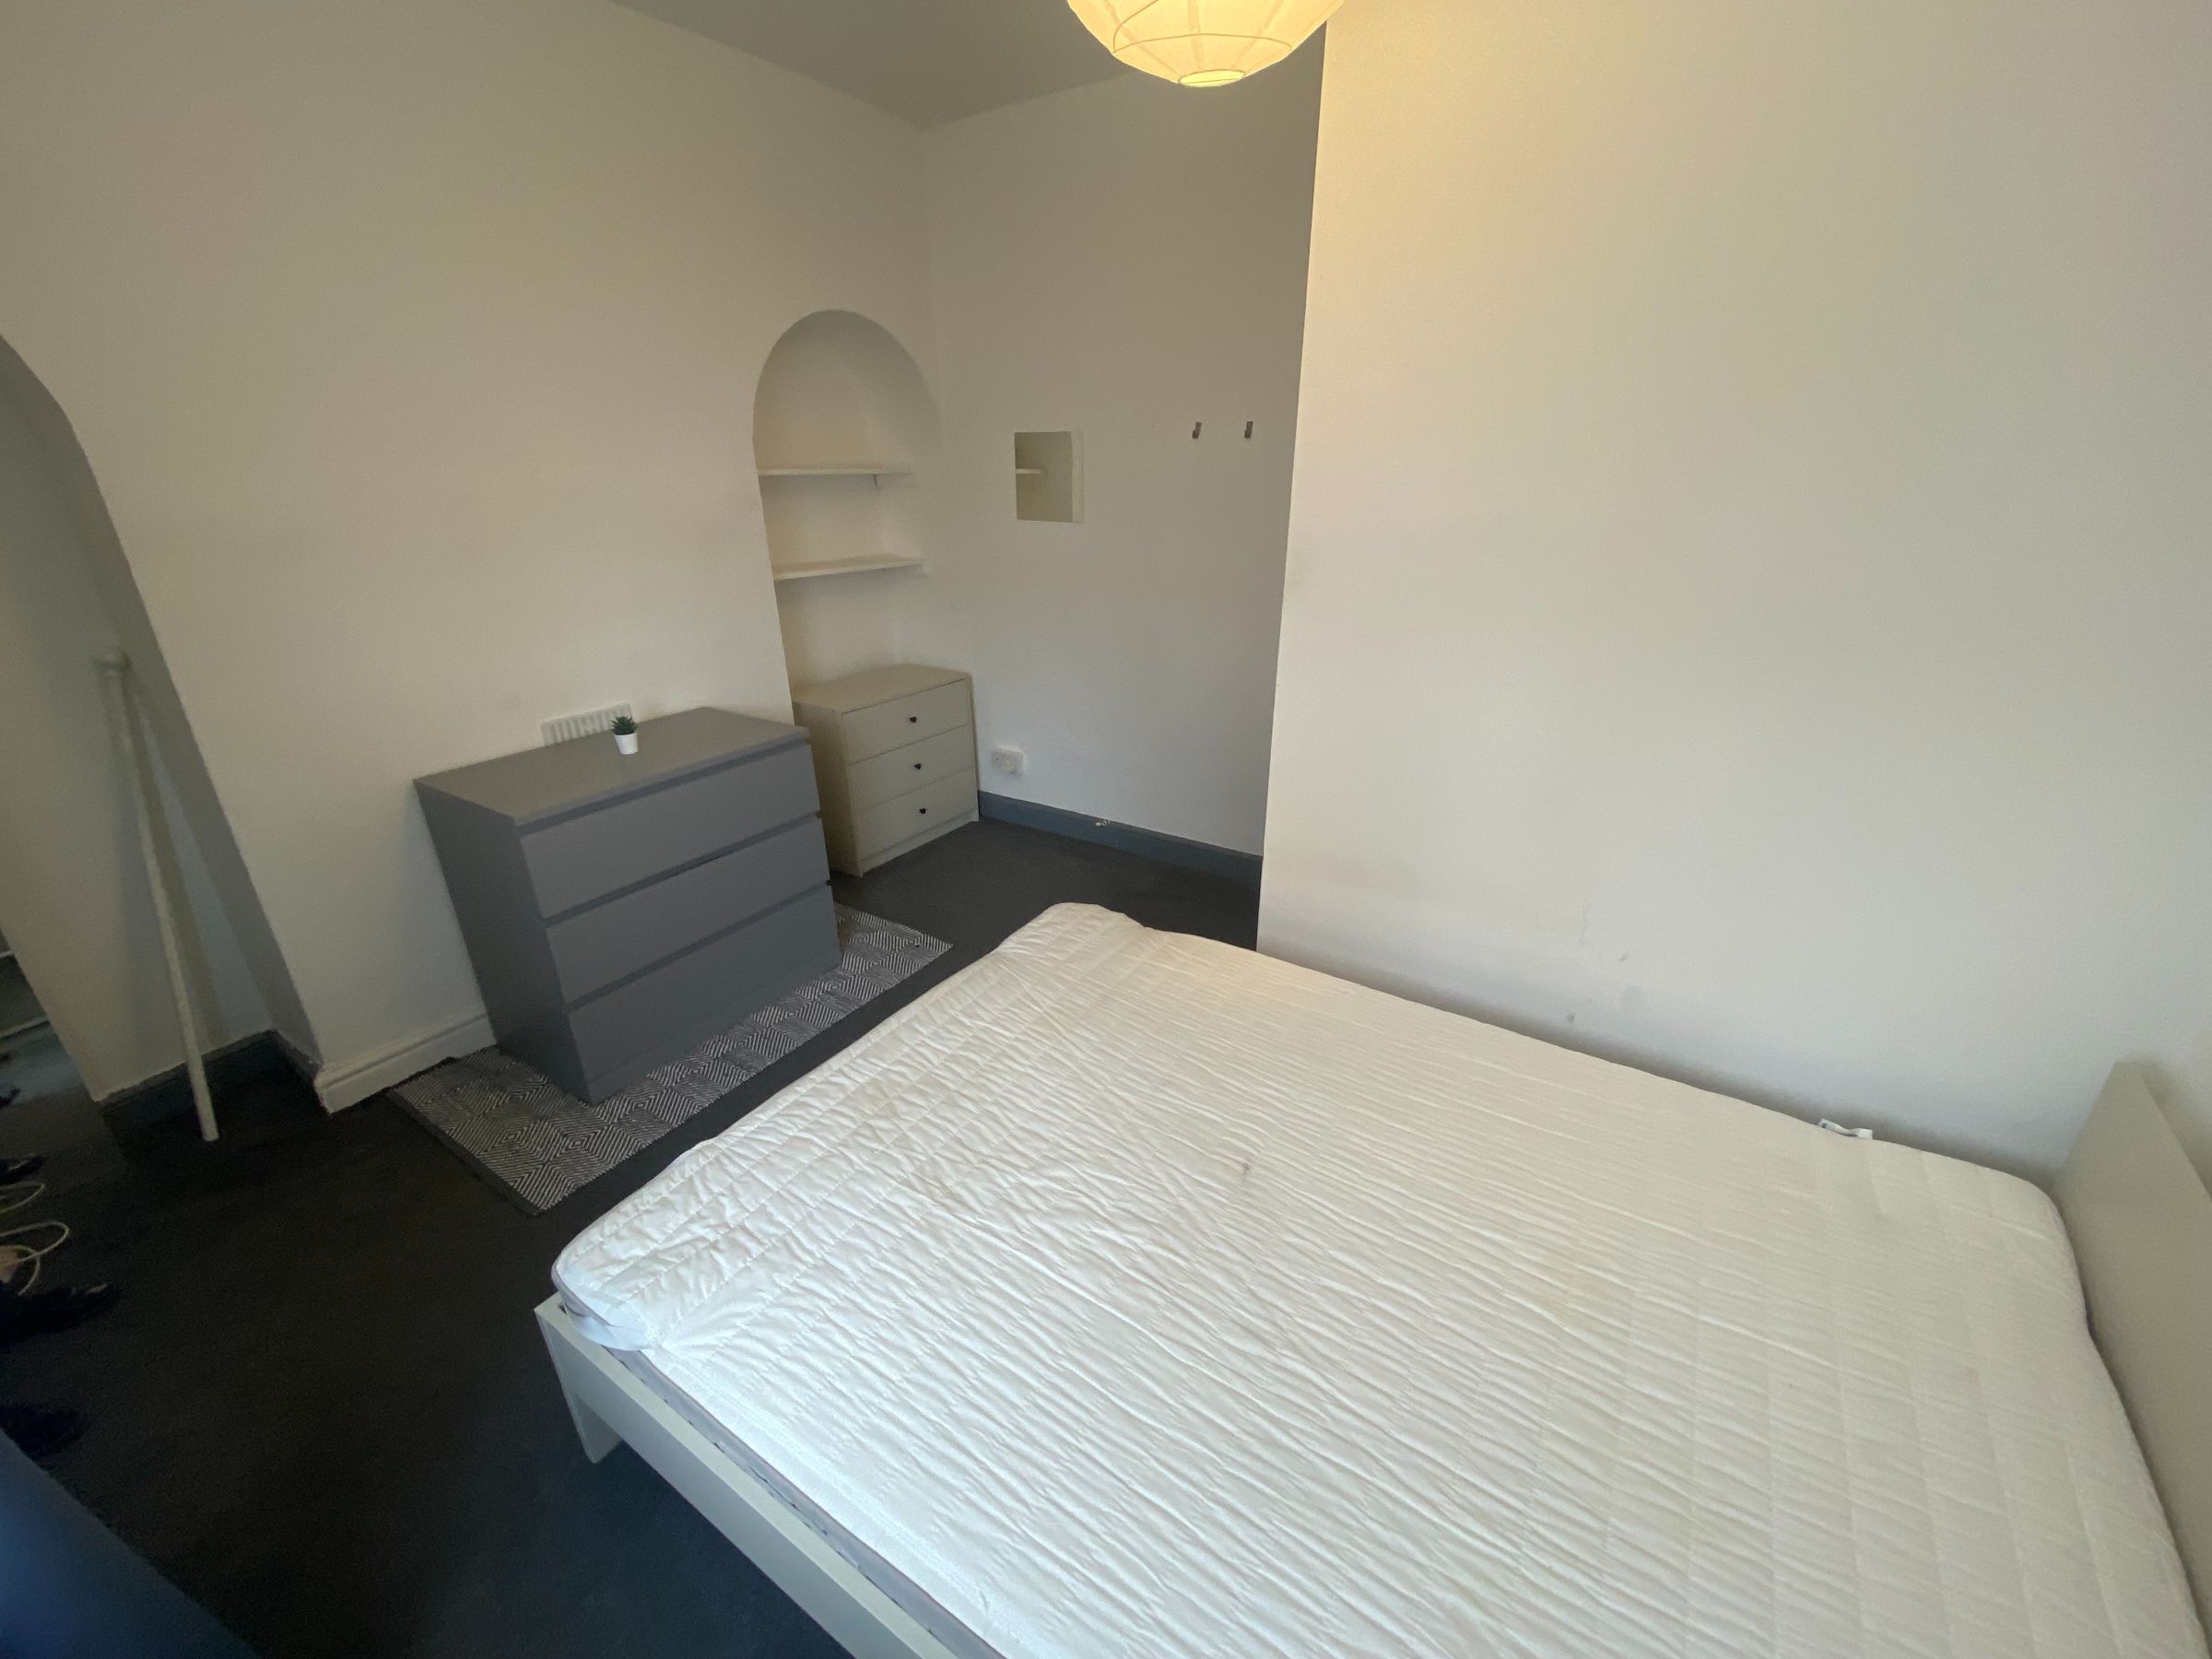 1 bed Room for rent in Doncaster. From 247 Property Services Ltd